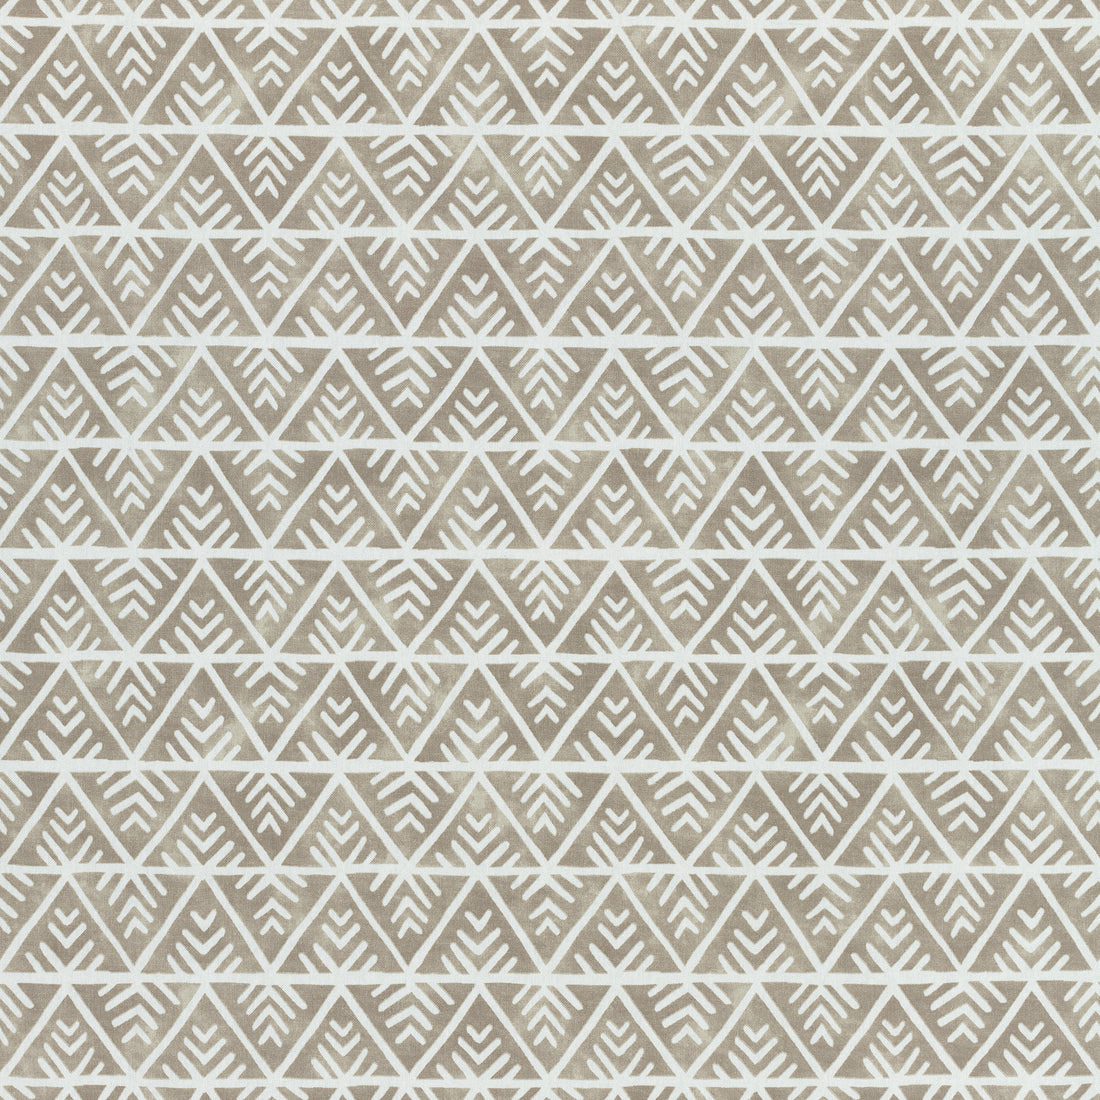 Jules fabric in flax color - pattern number AF78703 - by Anna French in the Palampore collection